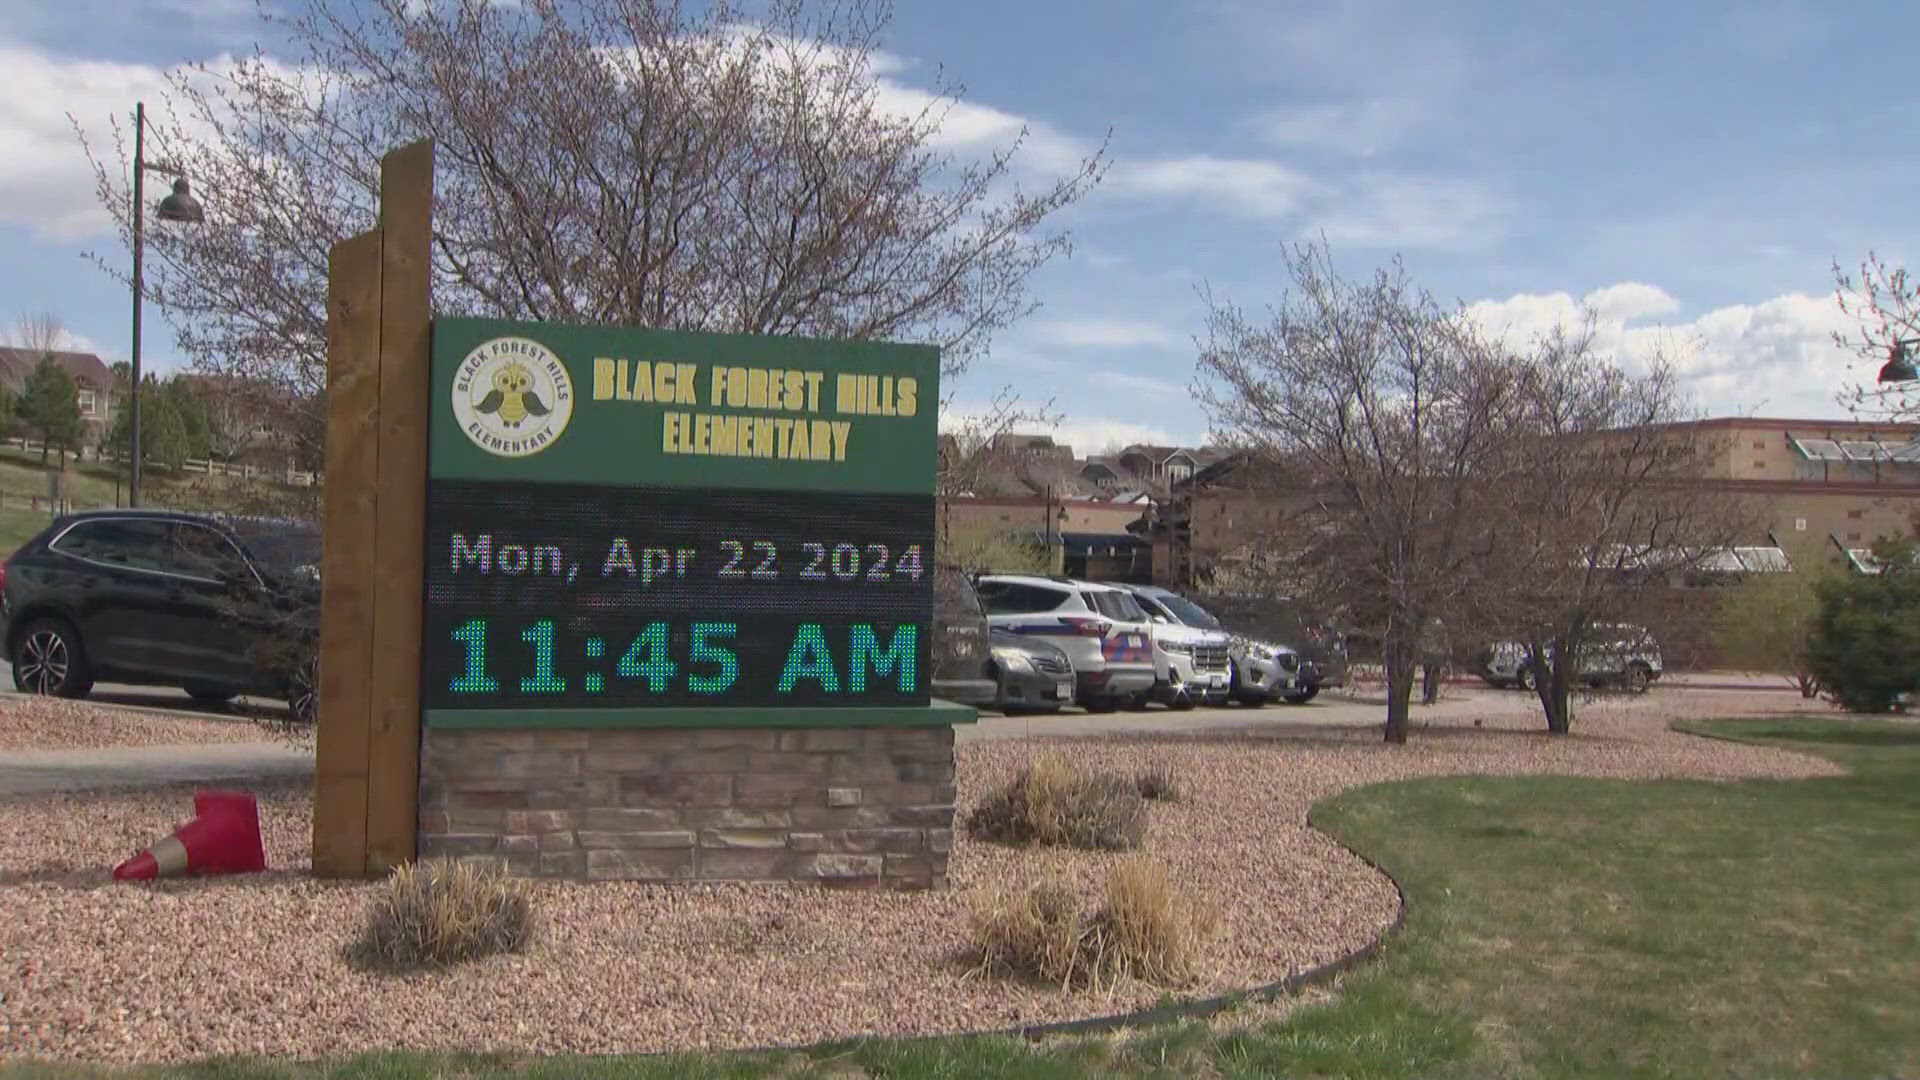 The superintendent of Cherry Creek Schools met with parents upset about the response after an attempted kidnapping at Black Forest Hills Elementary.